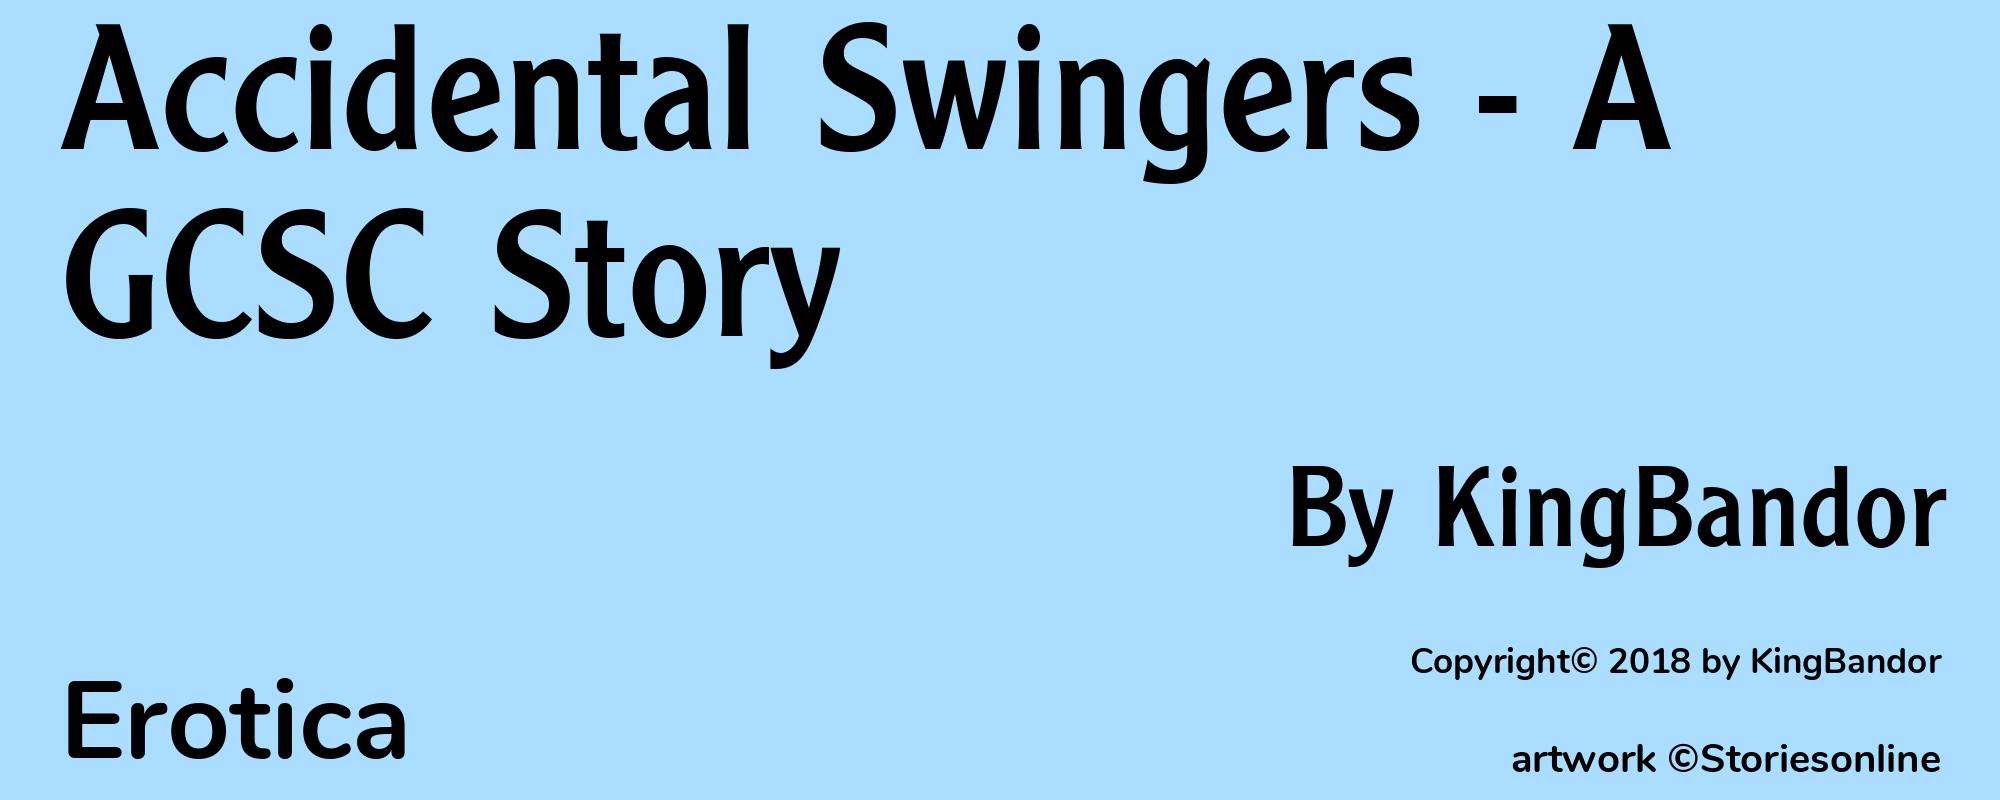 Accidental Swingers - A GCSC Story - Cover